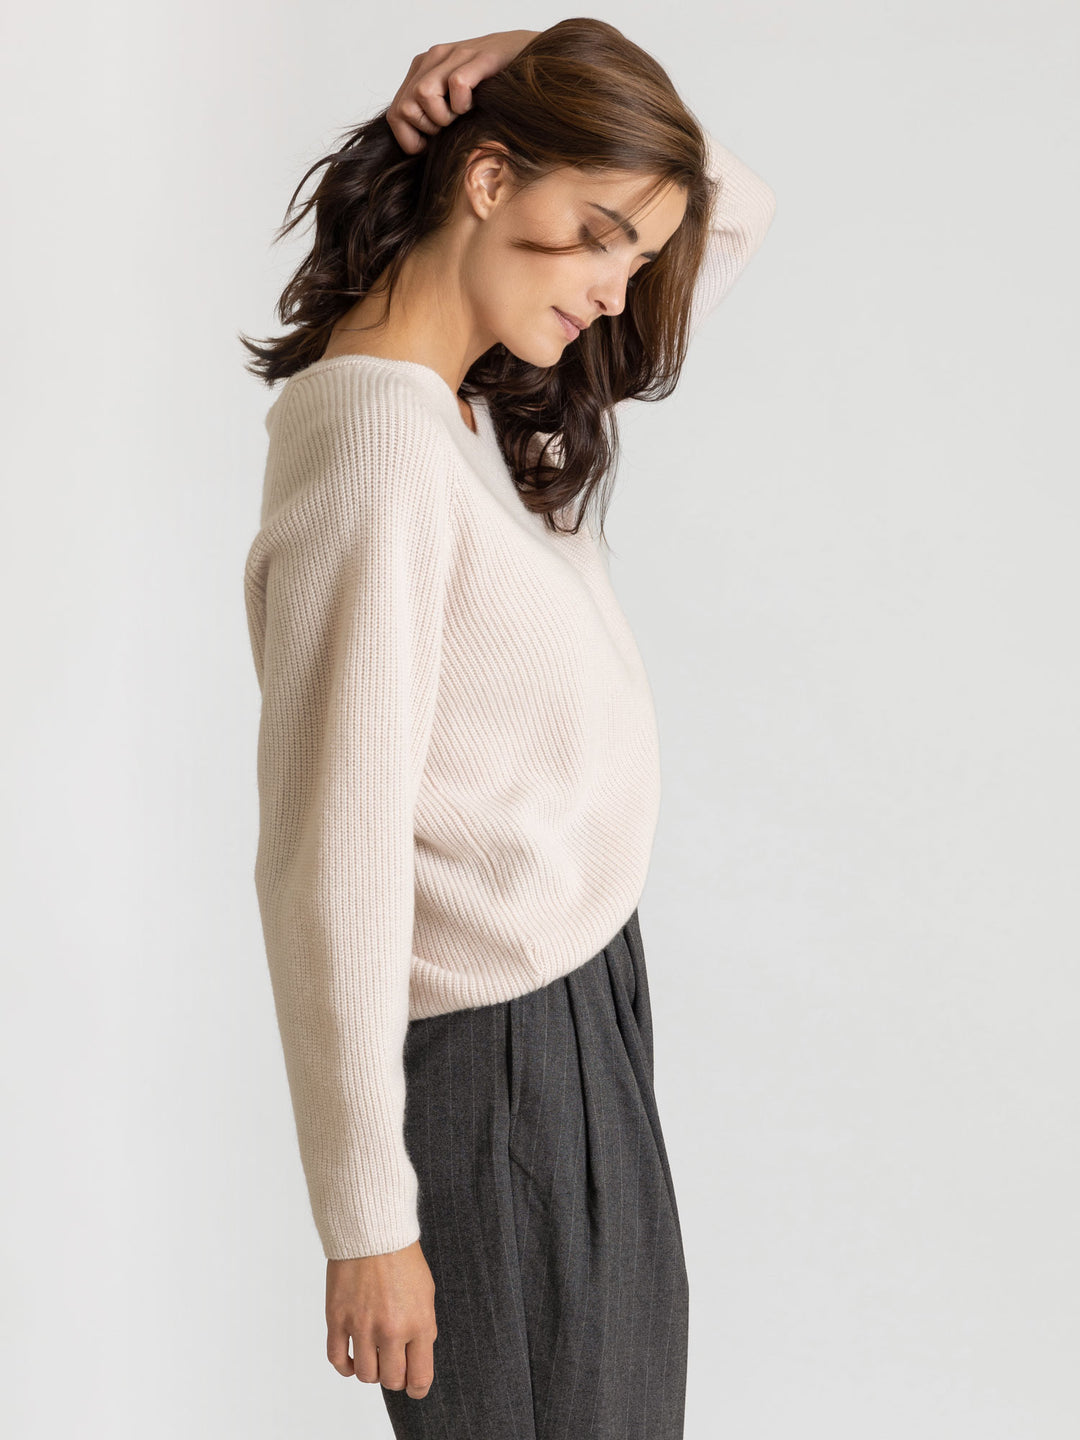 Cashmere sweater, long sleeved, rib knit, 100% pure cashmere, non itching, supersoft, warm, shell, pearl, light color